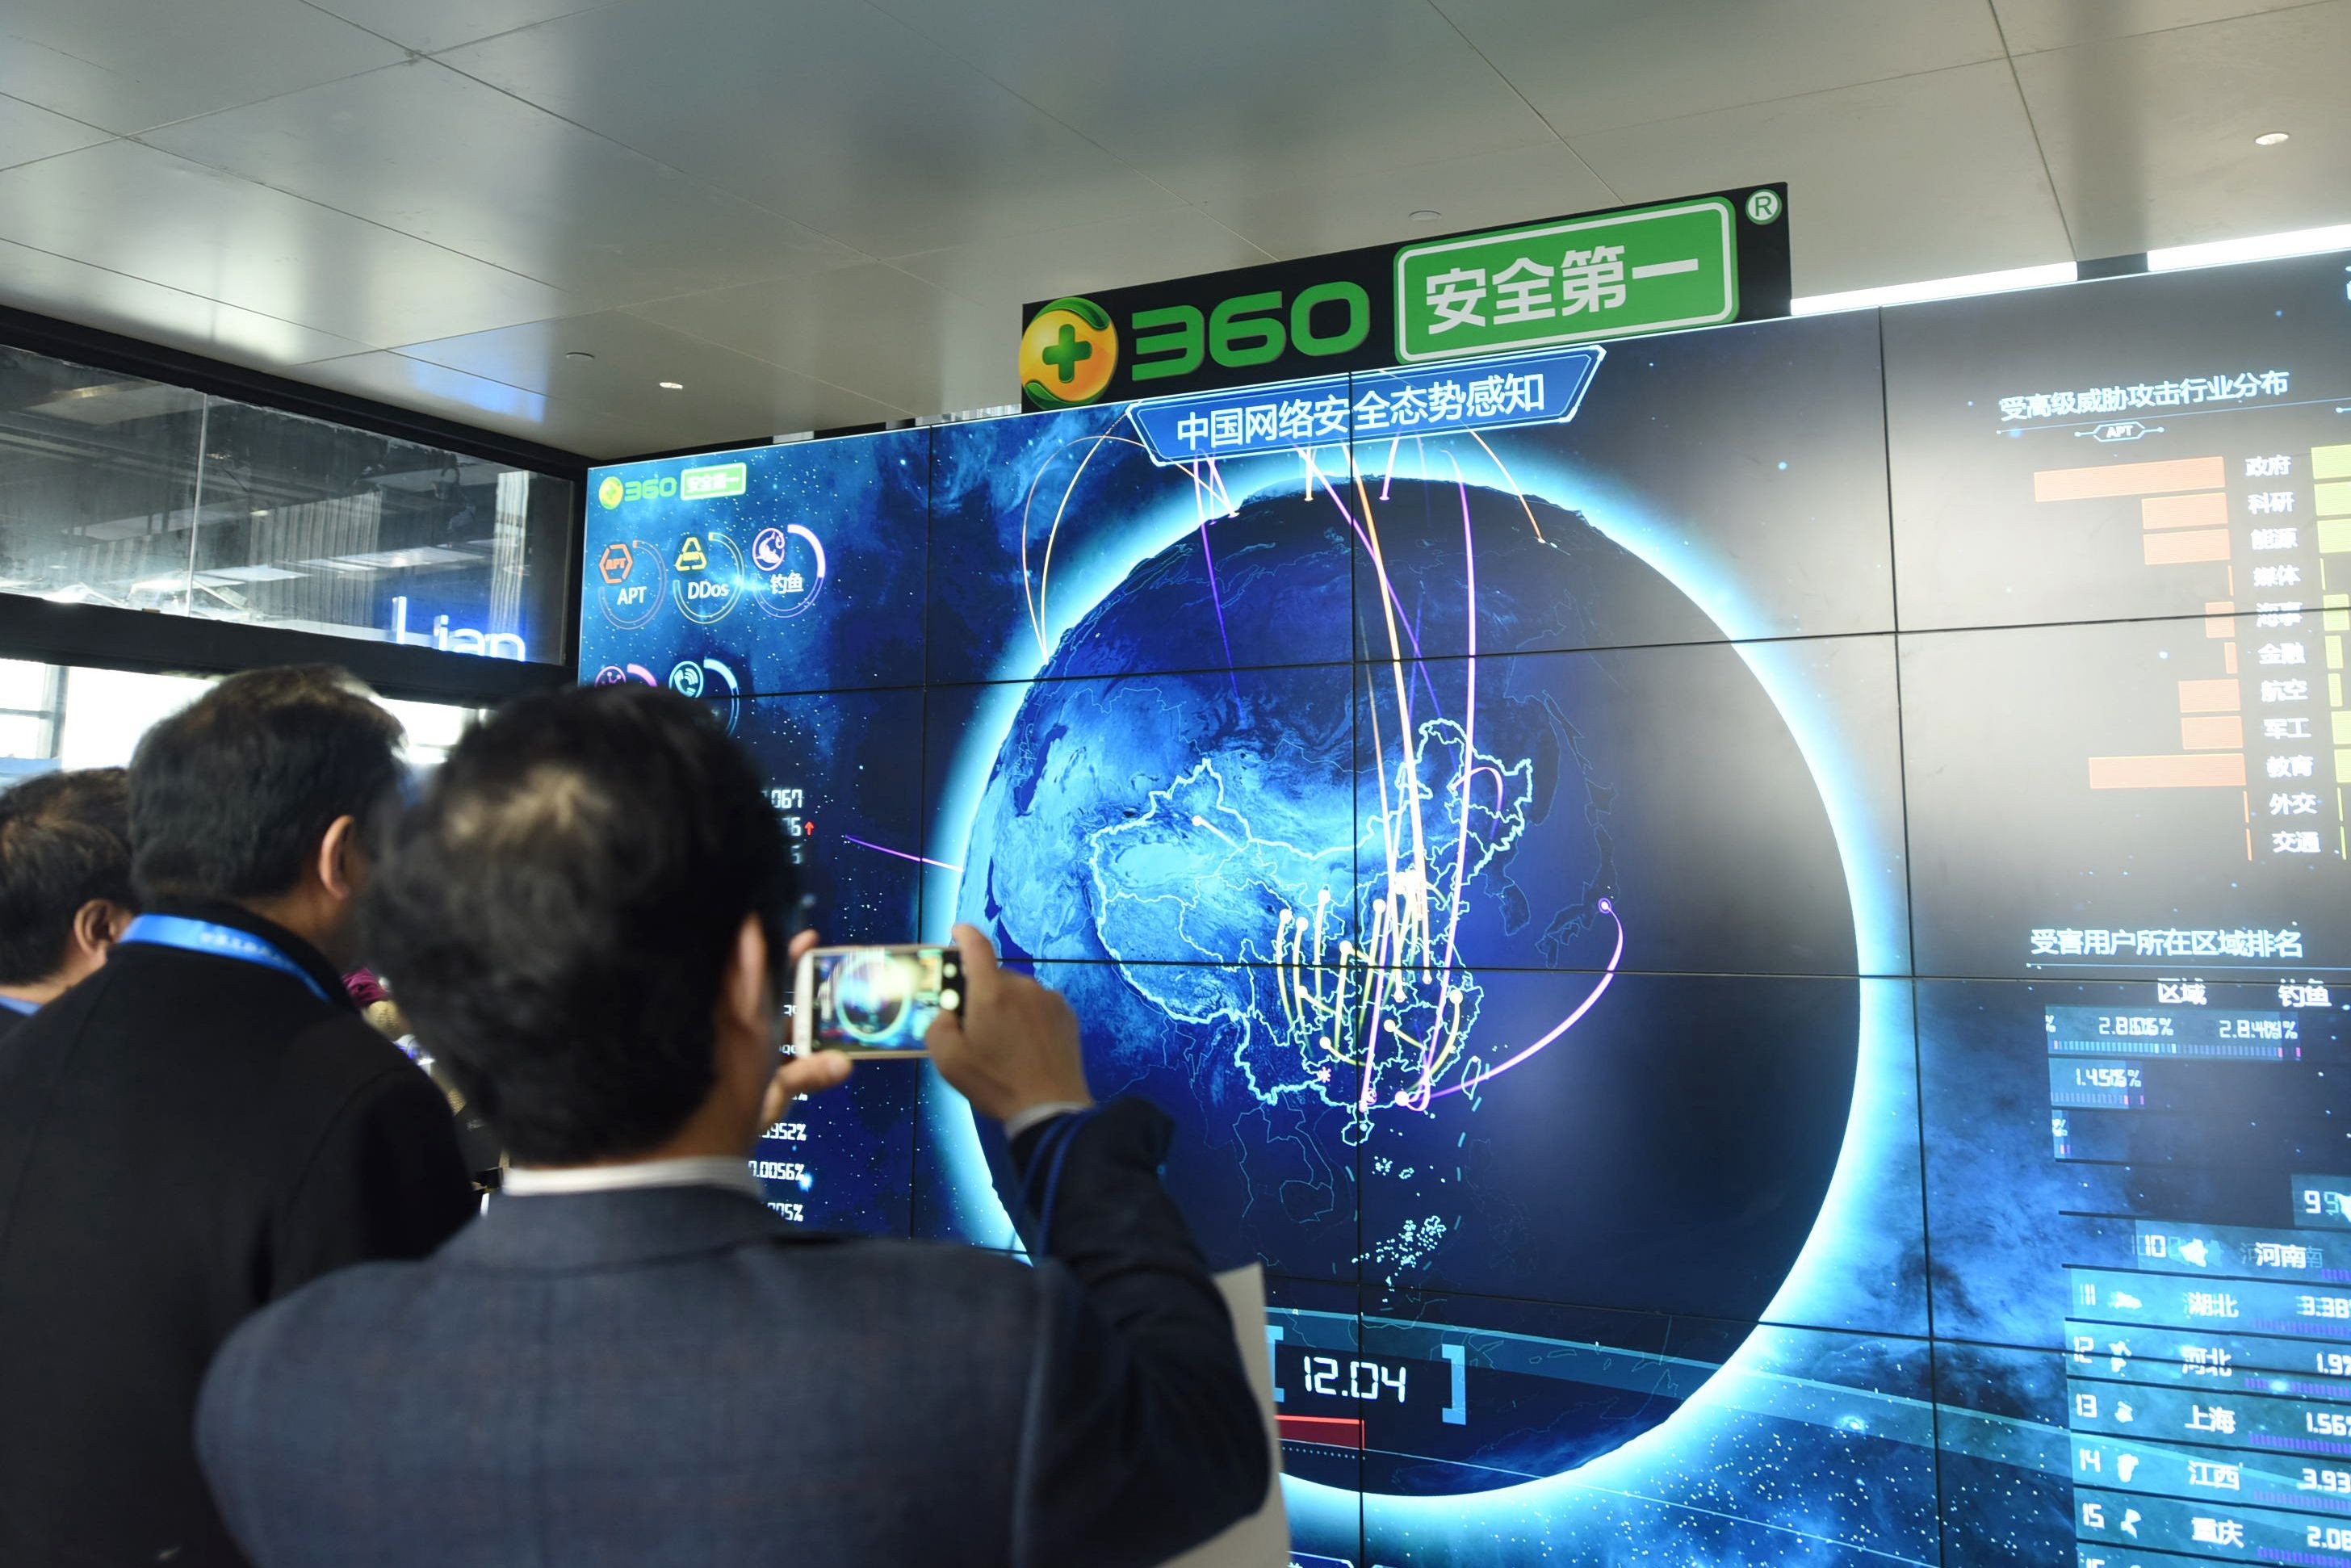 Internet security data is displayed at the Qihoo booth during the 4th World Internet Conference, held in Wuzhen, in China's eastern Zhejiang province, in December. Photo: AFP